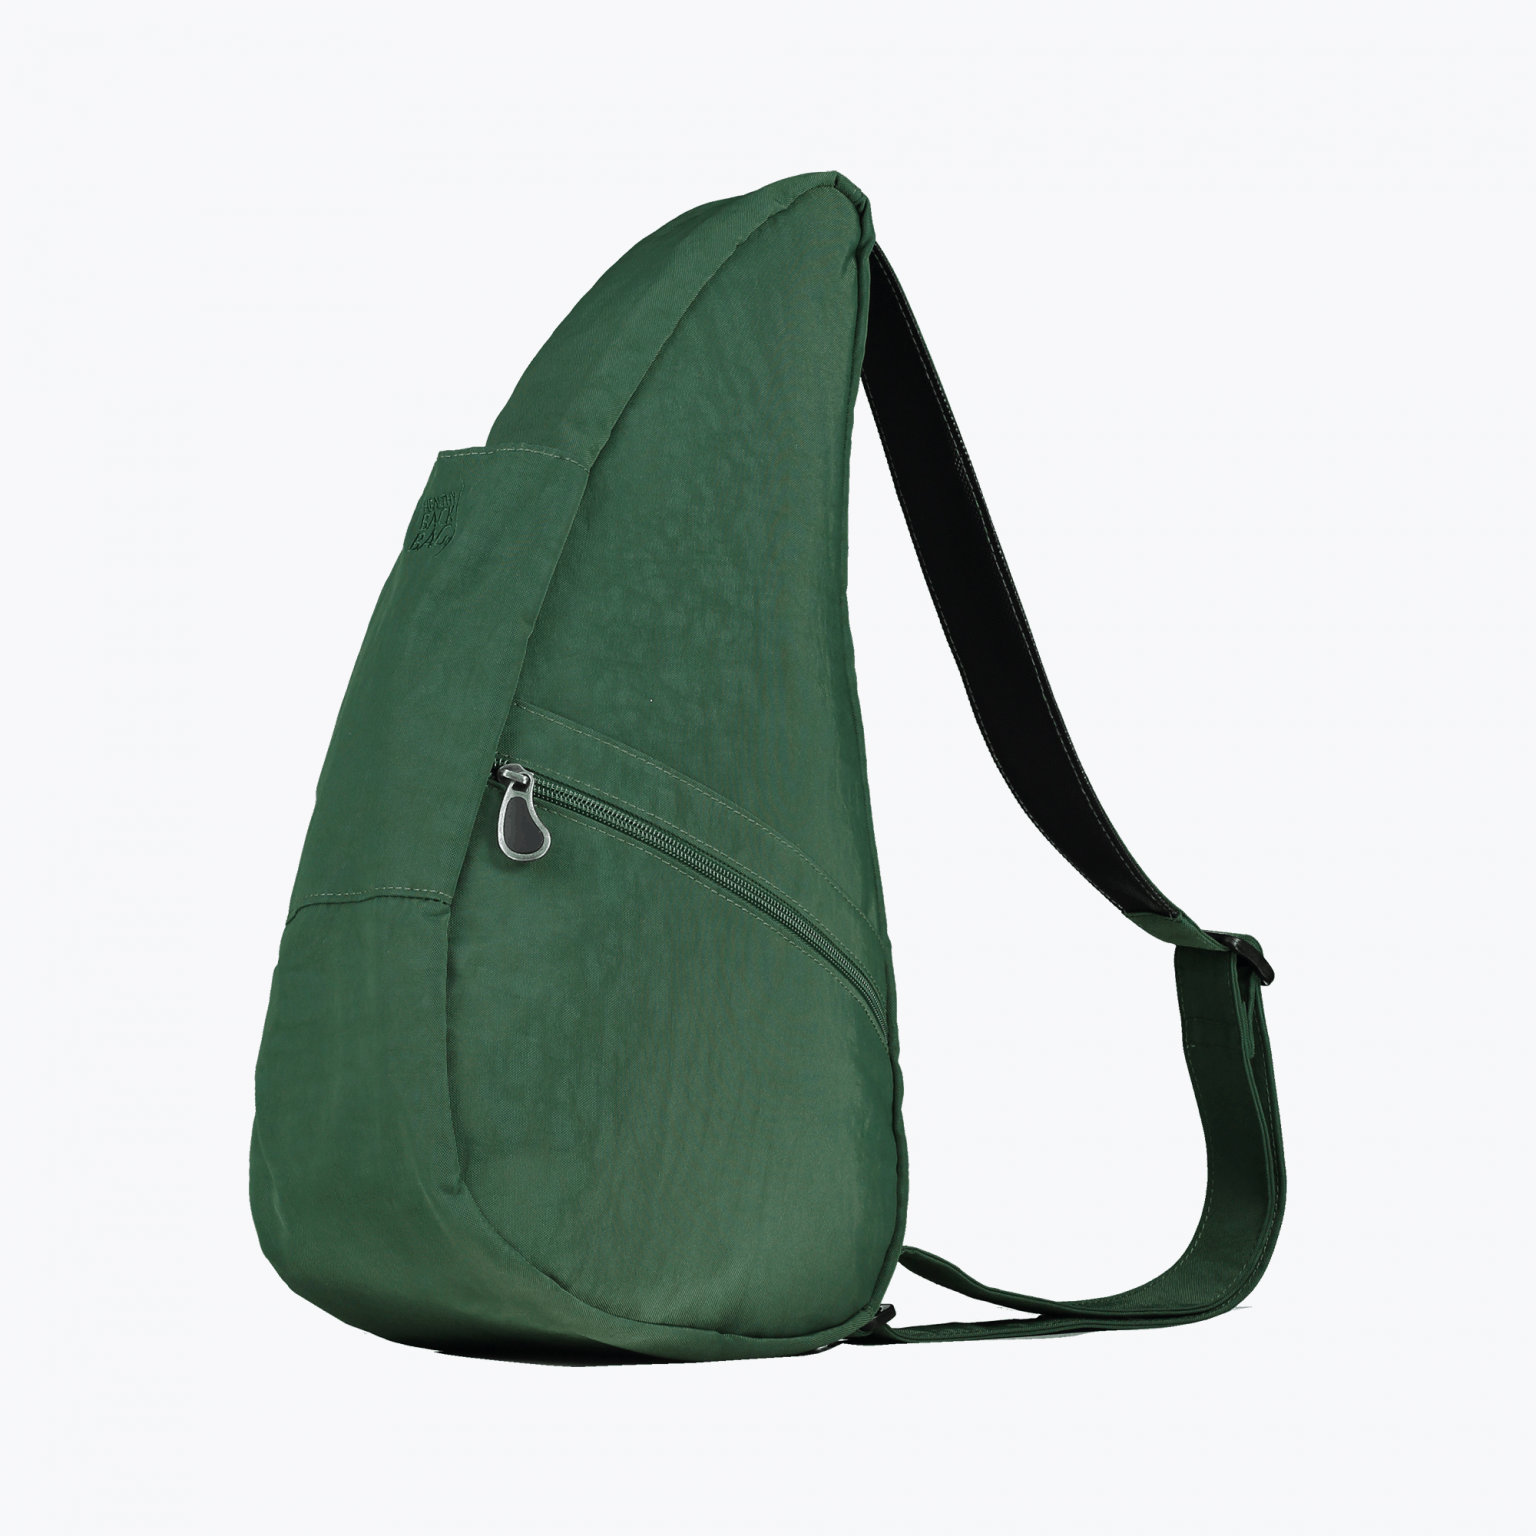 Textured Nylon Spruce S by The Healthy Back Bag